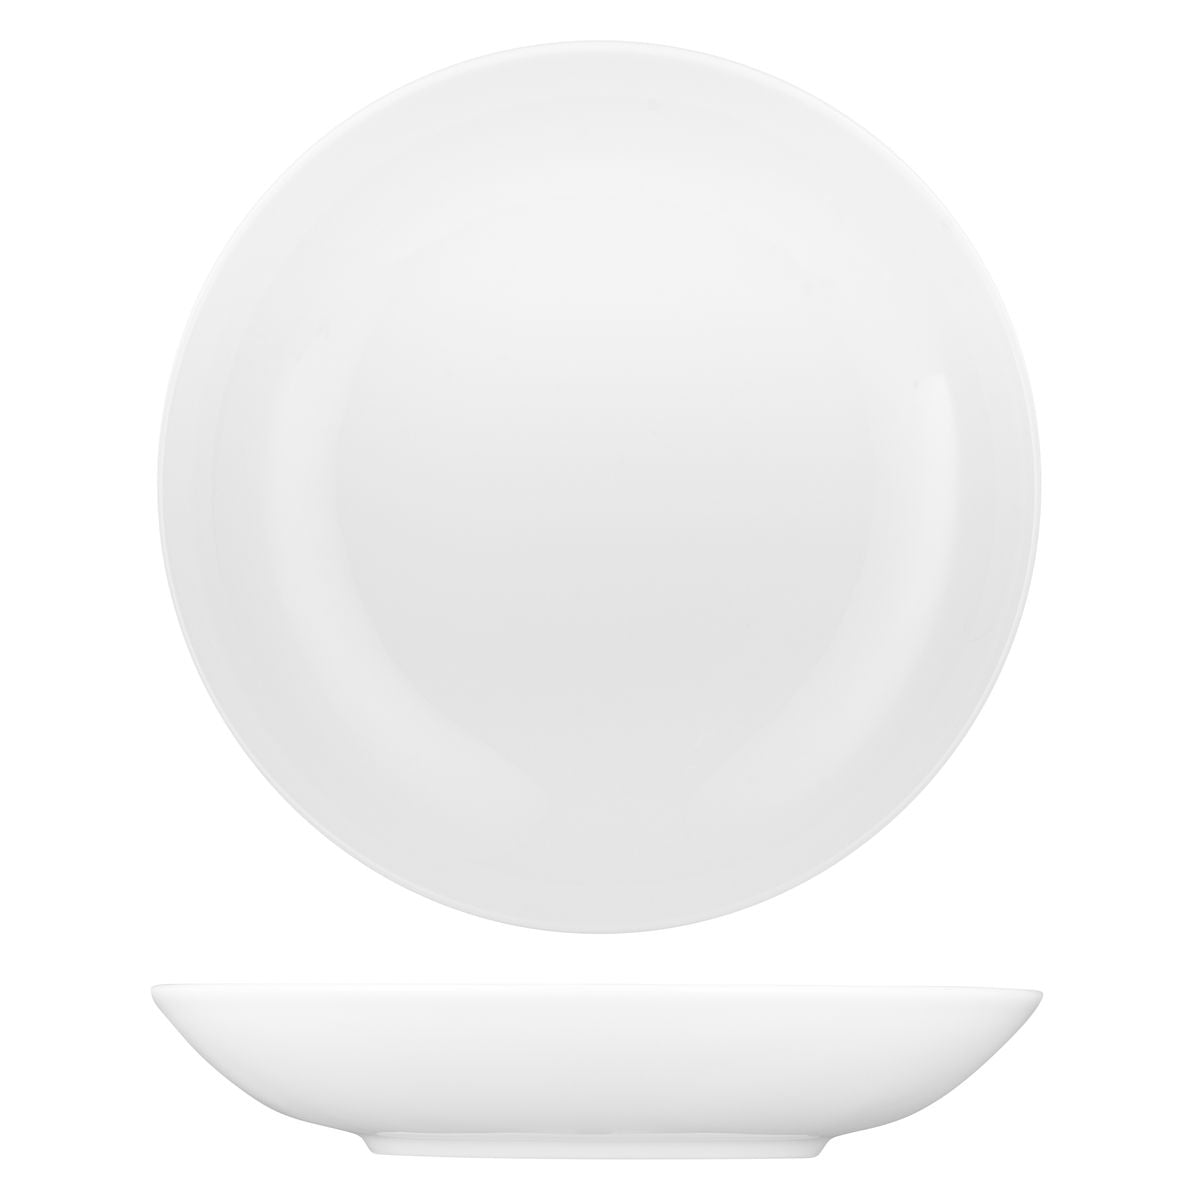 Serving Bowl- 7000Ml(Bubc46), Buffet from Australia Fine China. made out of Porcelain and sold in boxes of 1. Hospitality quality at wholesale price with The Flying Fork! 